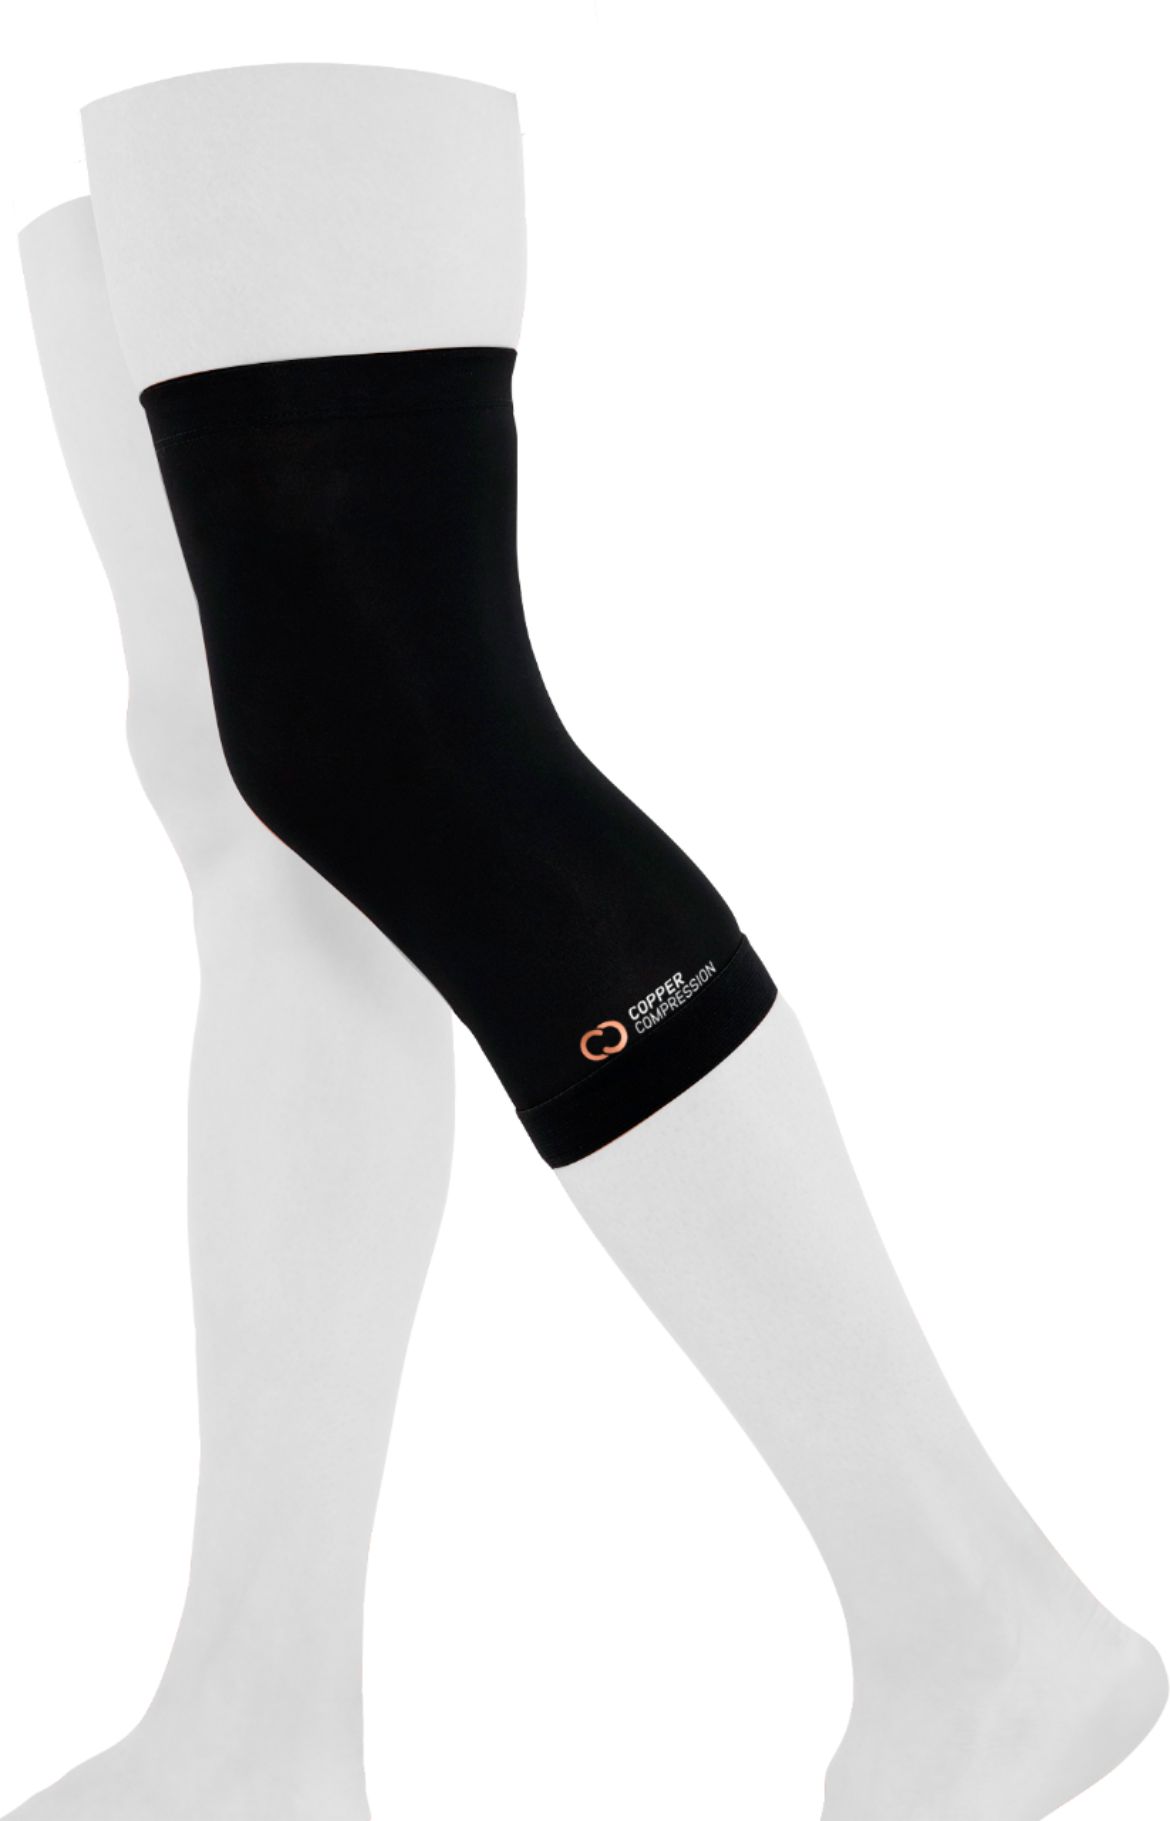 NEW CVS Copper Infused Compression Knee Sleeve Size Large FREE